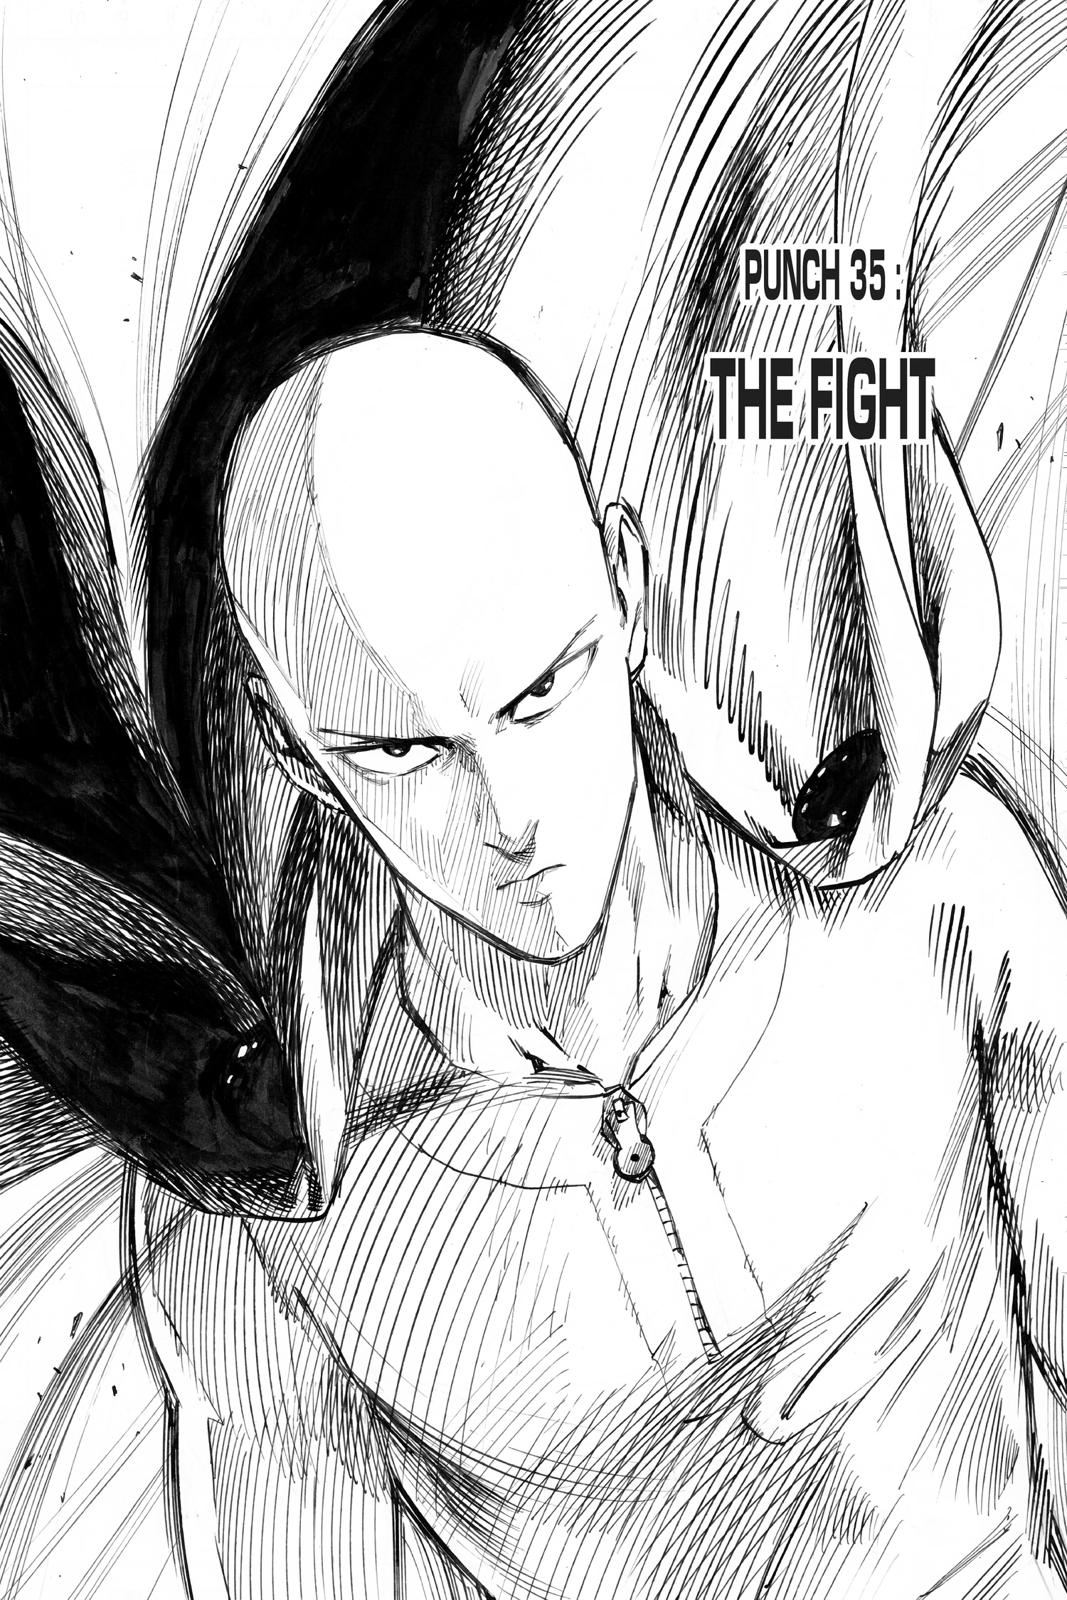 One-Punch Man, Punch 35 image 07